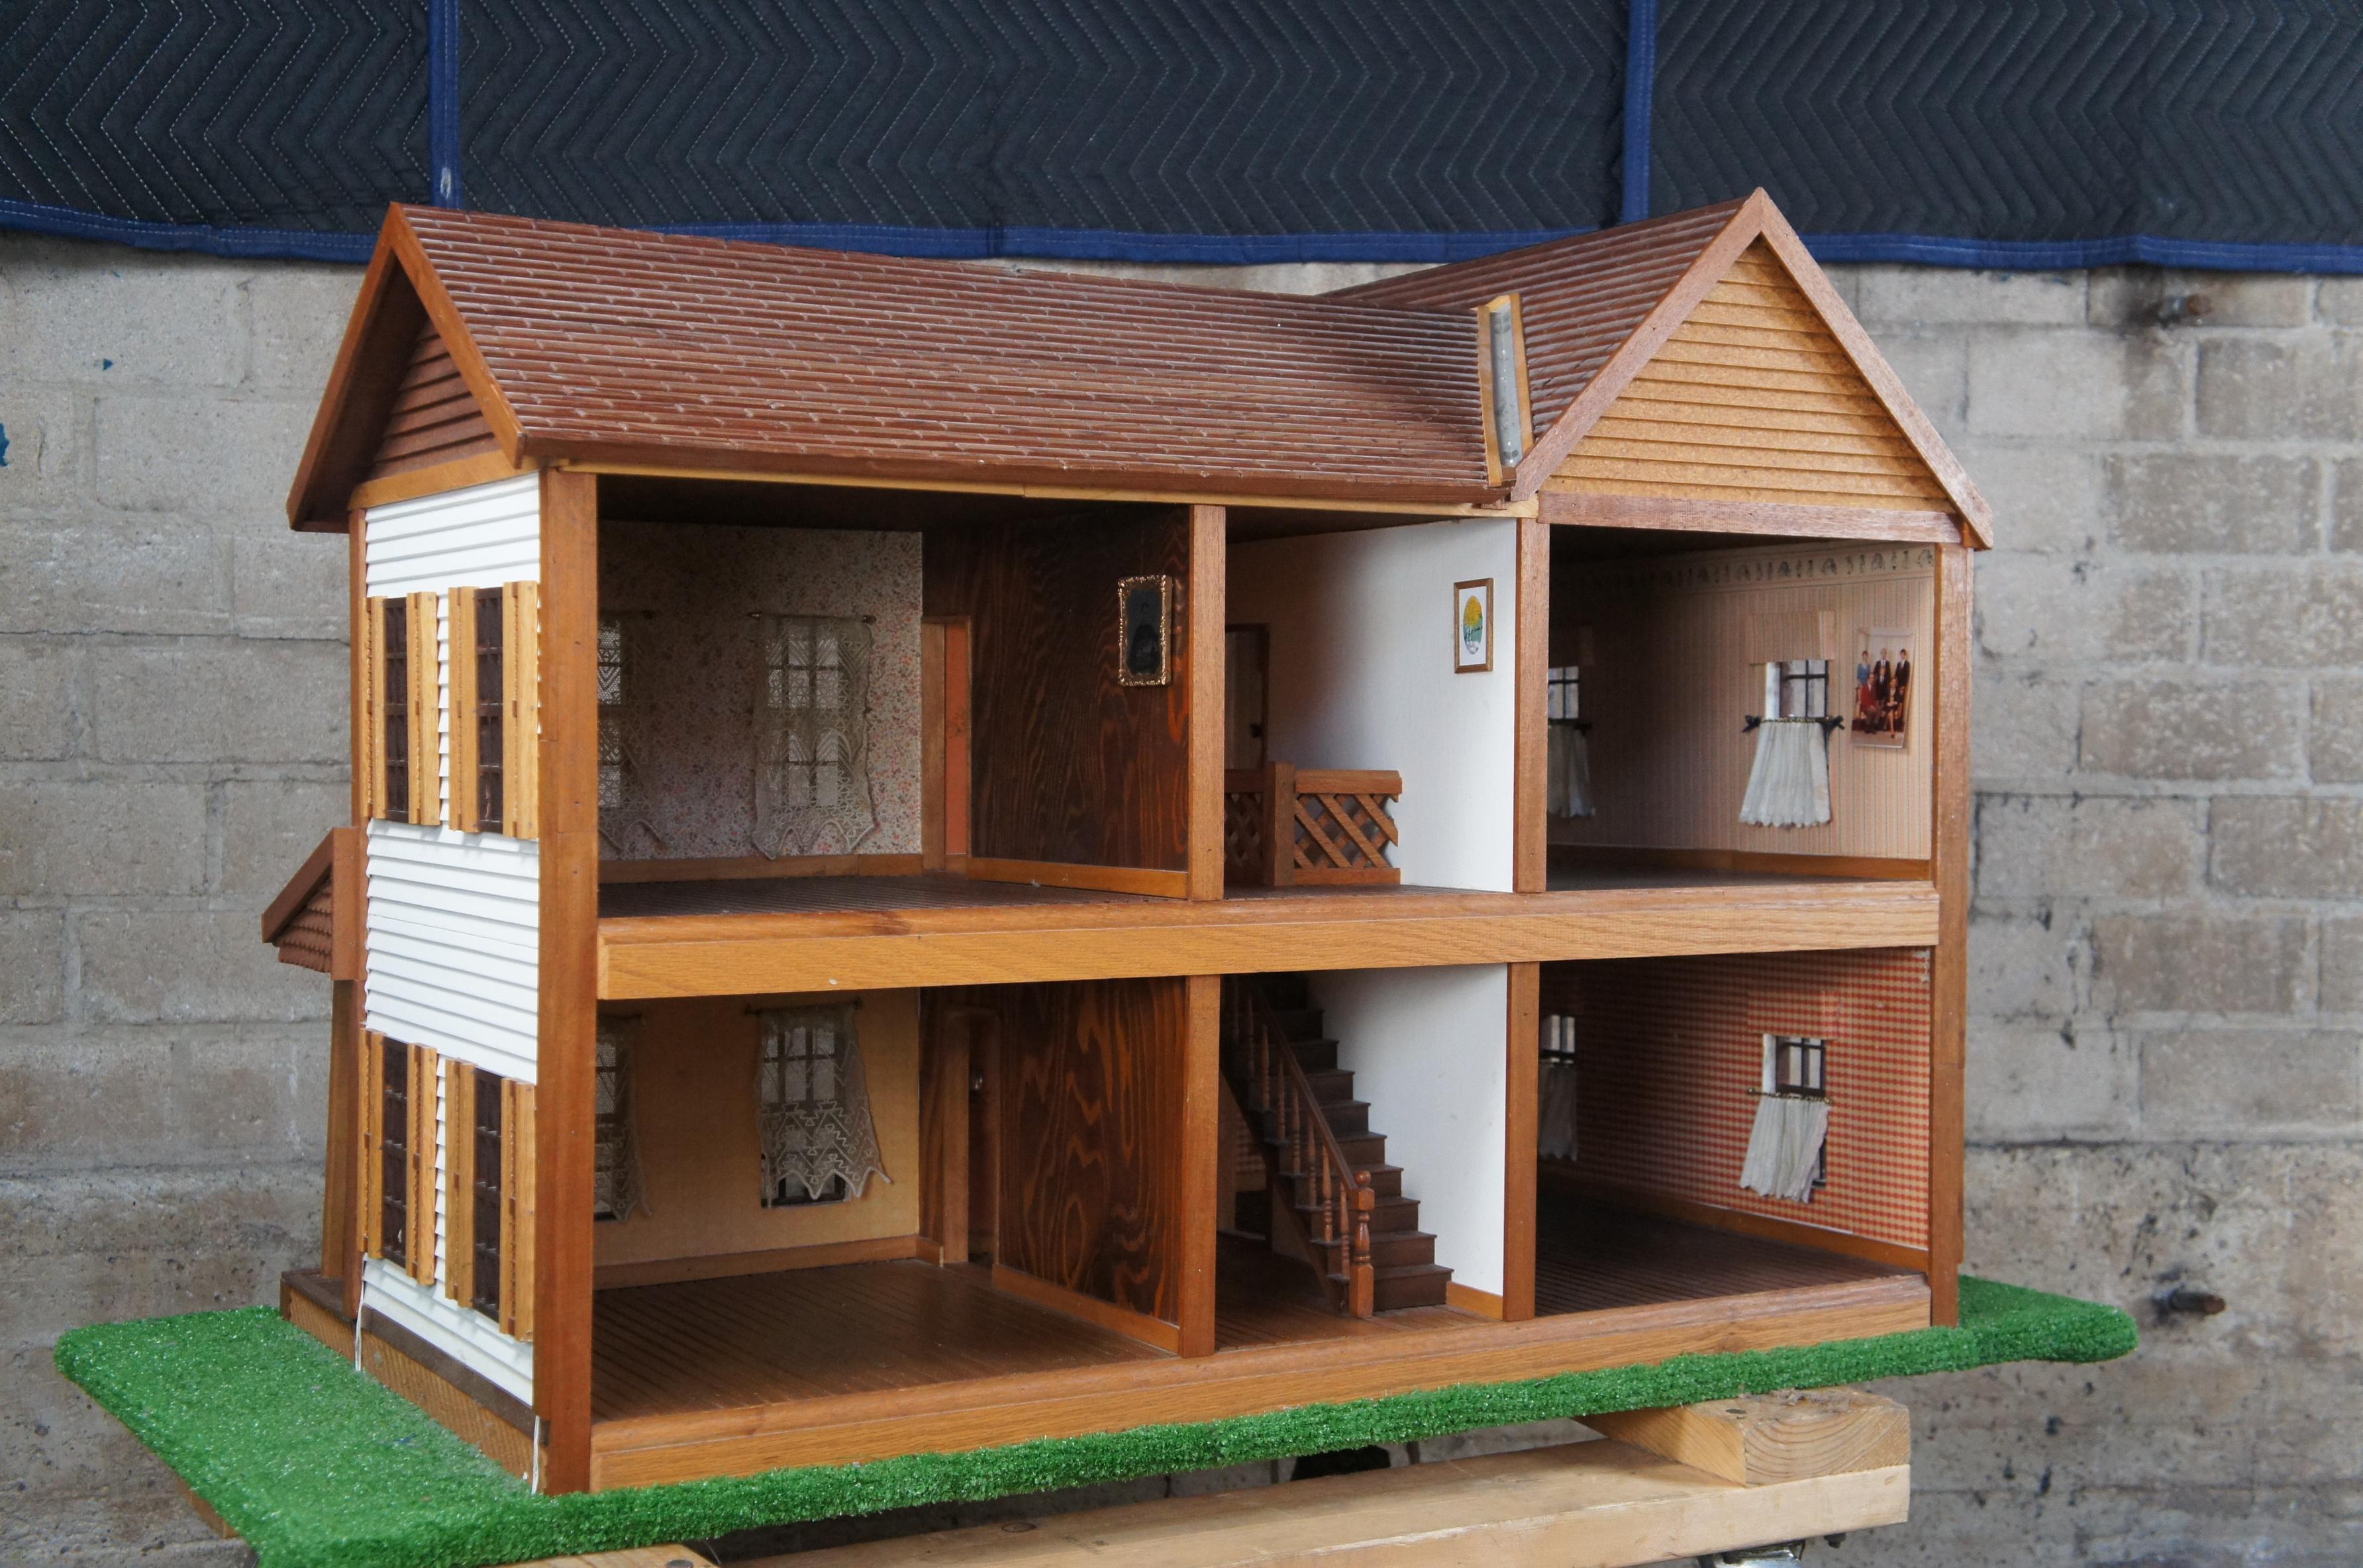 A lovely handmade 2 story 1:12 scale dollhouse. Made from pine with cut moldings, siding, shutters, front porch with turned railings and windows with curtains. The interior has a wood floor, staircase and wallpaper. Mounted to a wooden base with